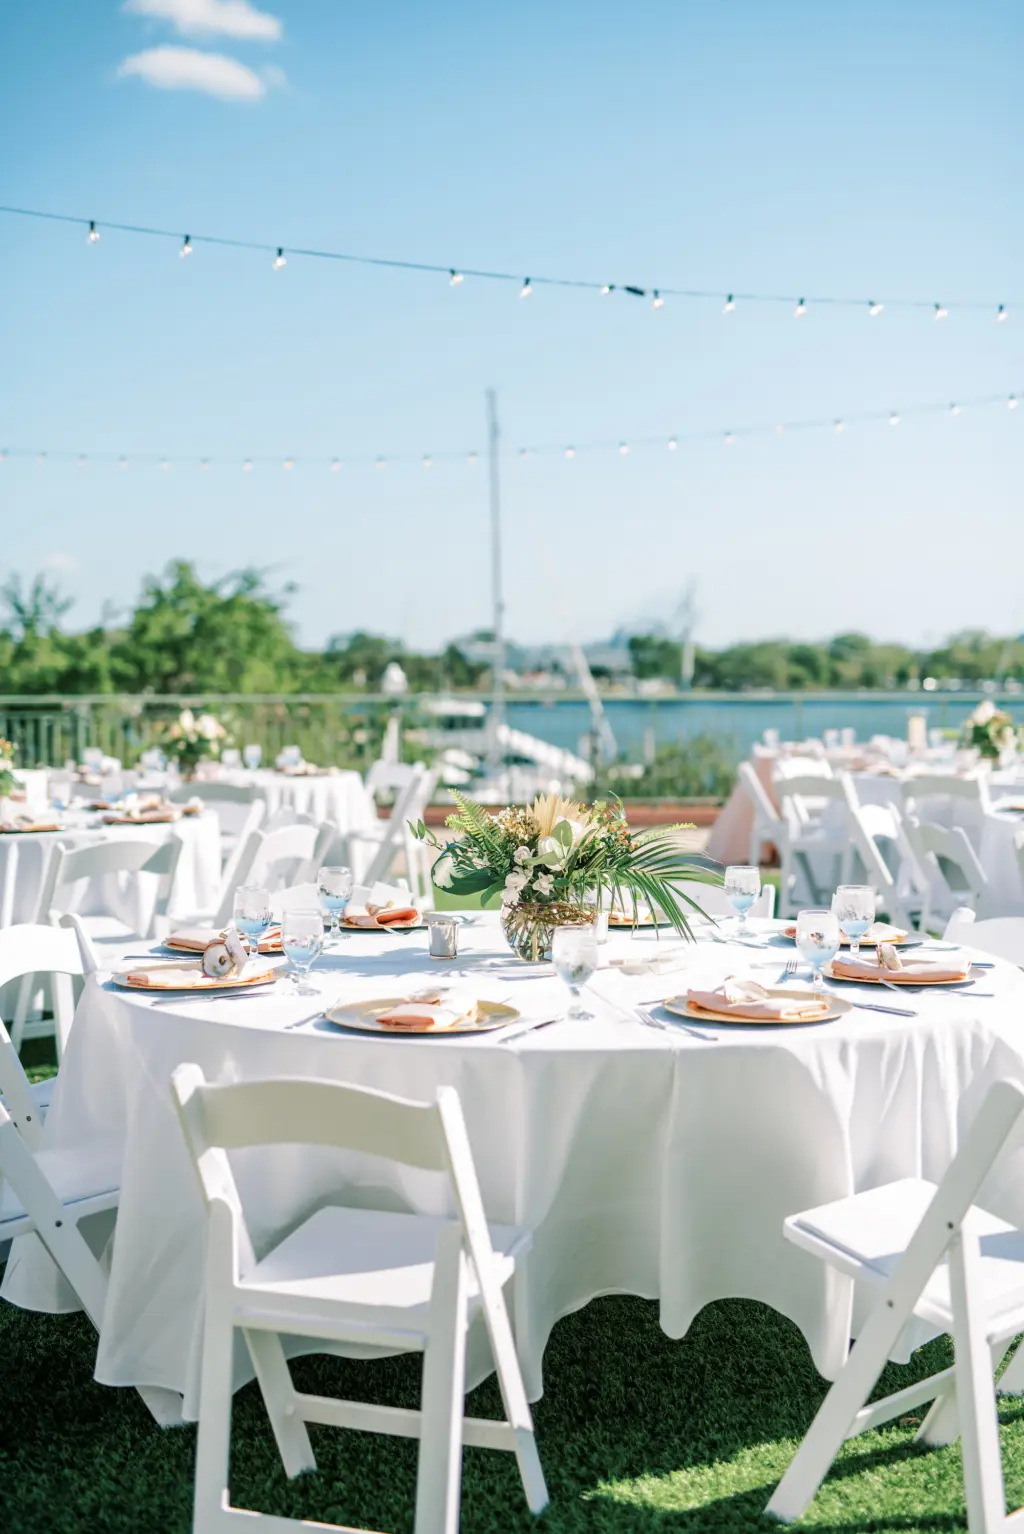 White Garden Chairs and Linen with Blush Napkins | Palm Frond Centerpiece Ideas | Outdoor Old Florida Wedding Reception Inspiration | St. Pete Rentals Gabro Event Services